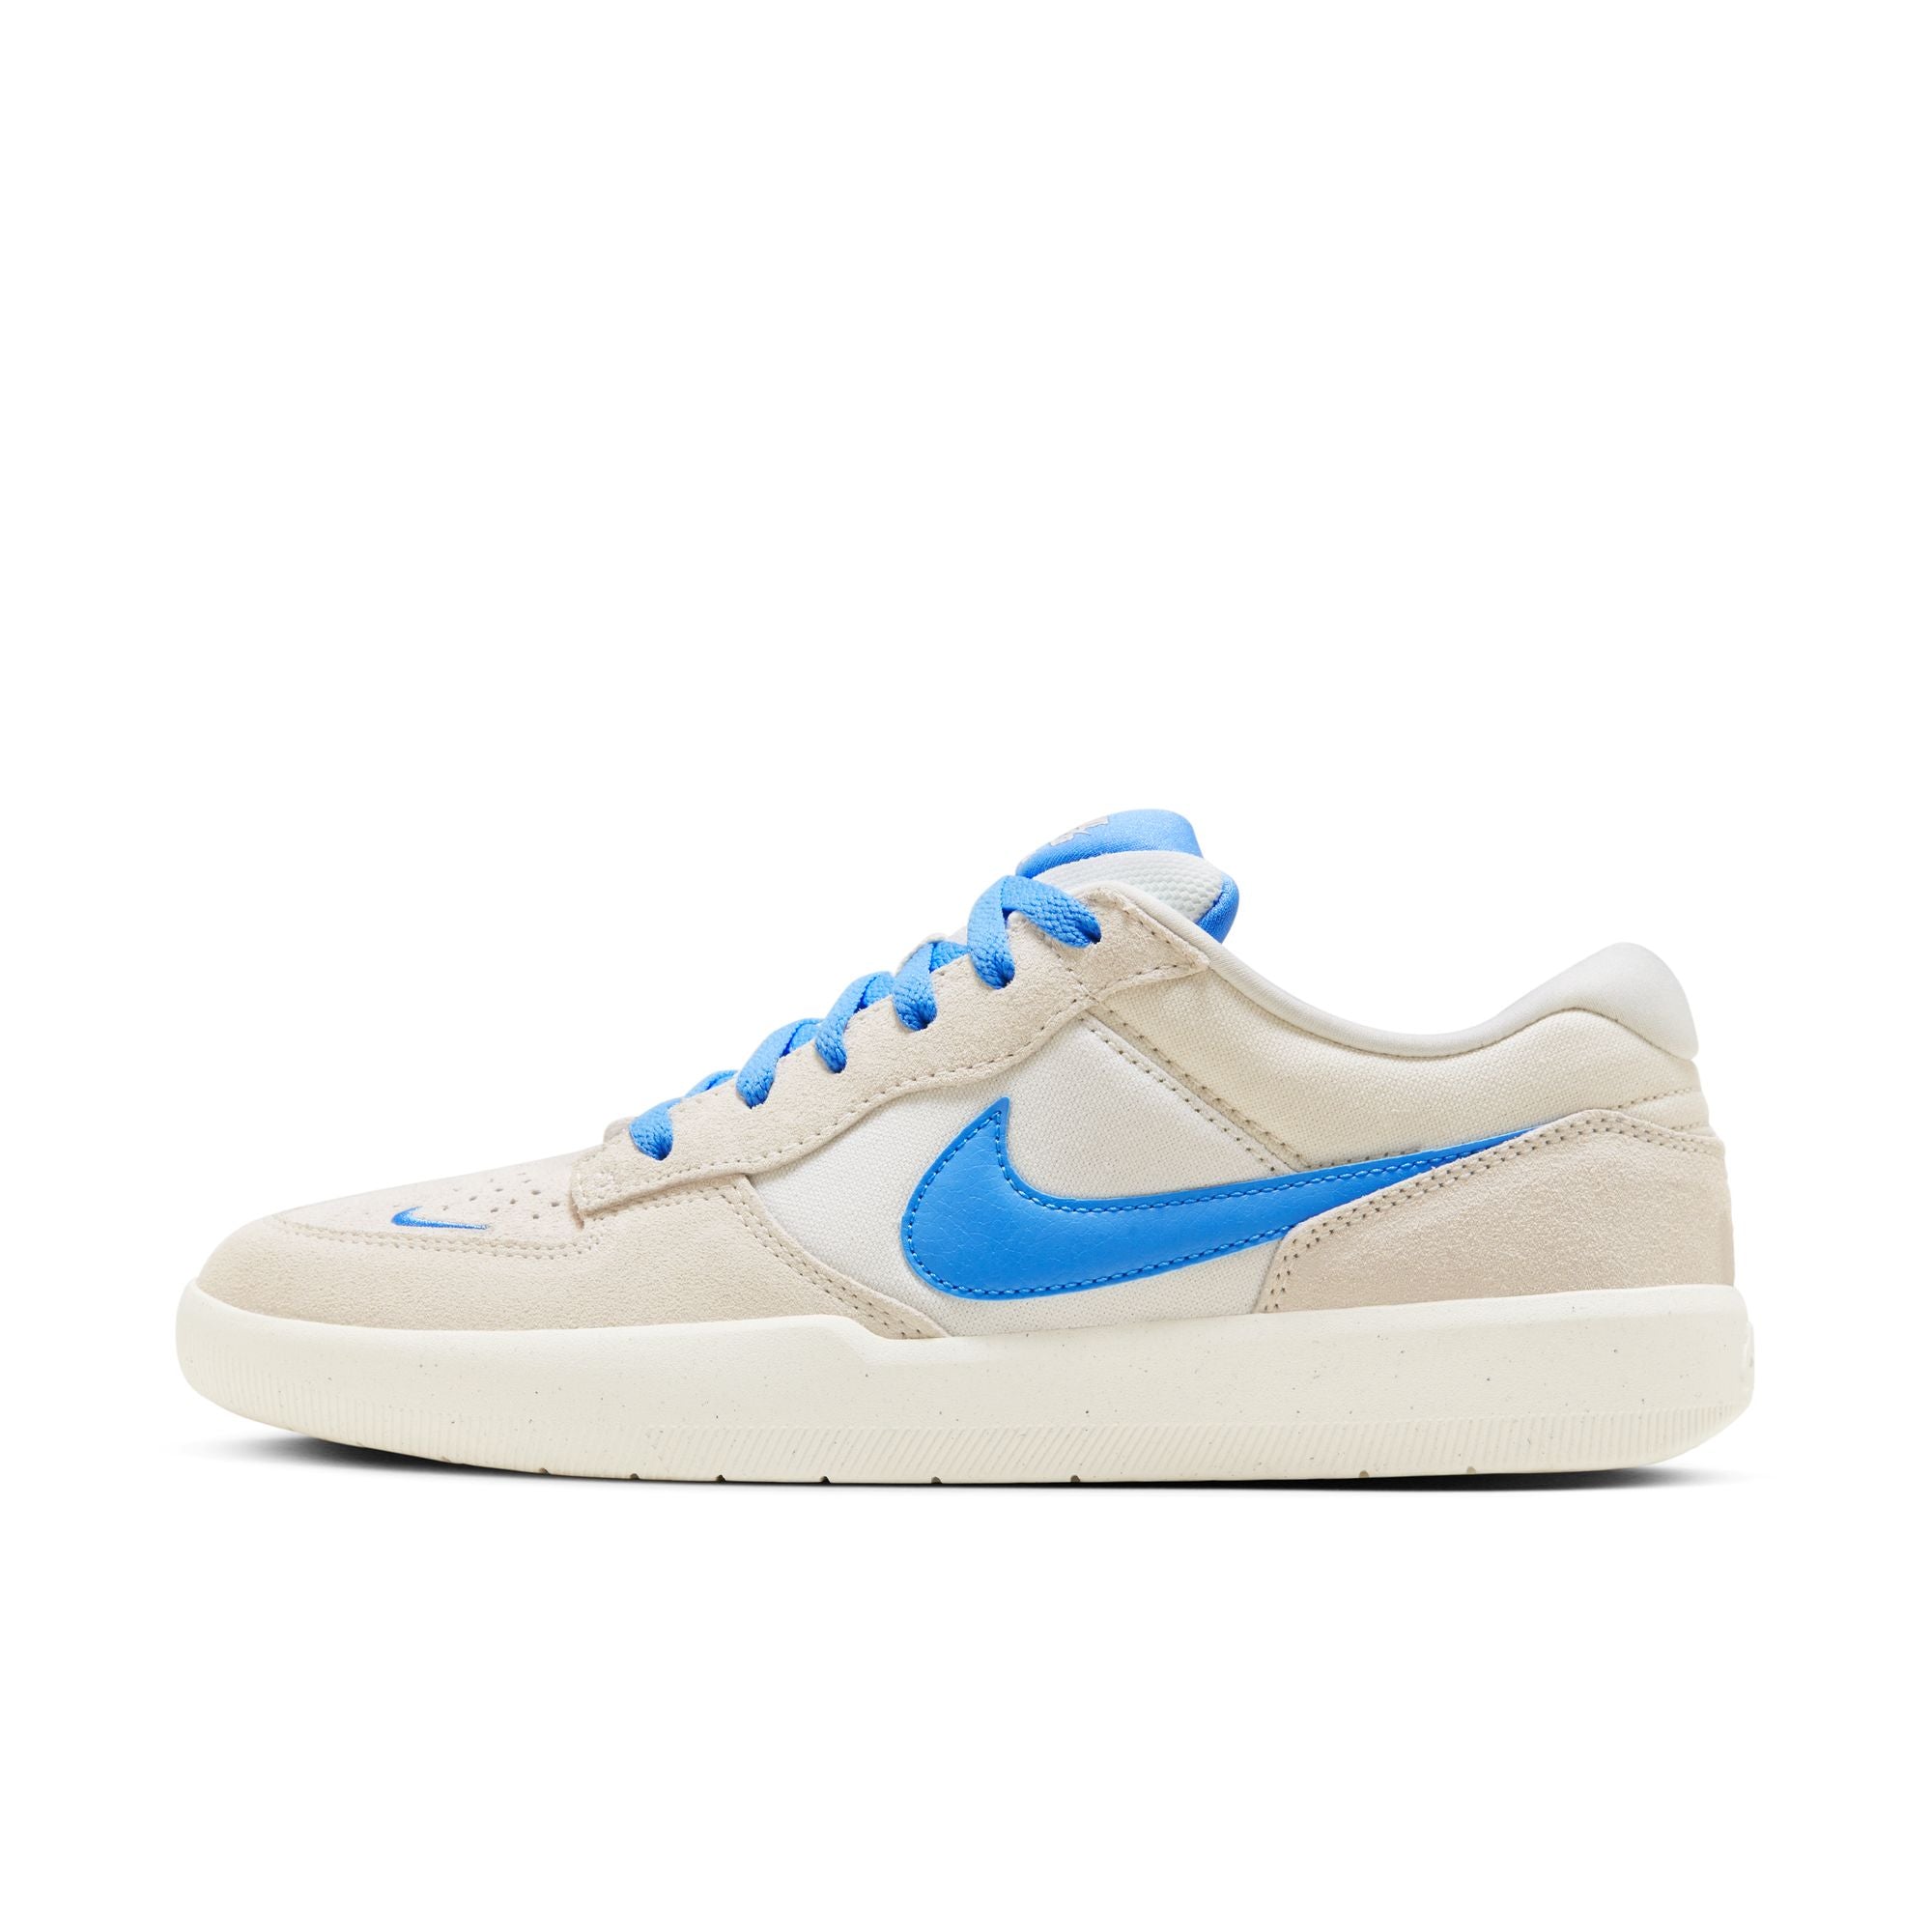 Low top Nike SB Force 58 Premium skate shoes, in white colourway with blue Nike swoosh on sides.